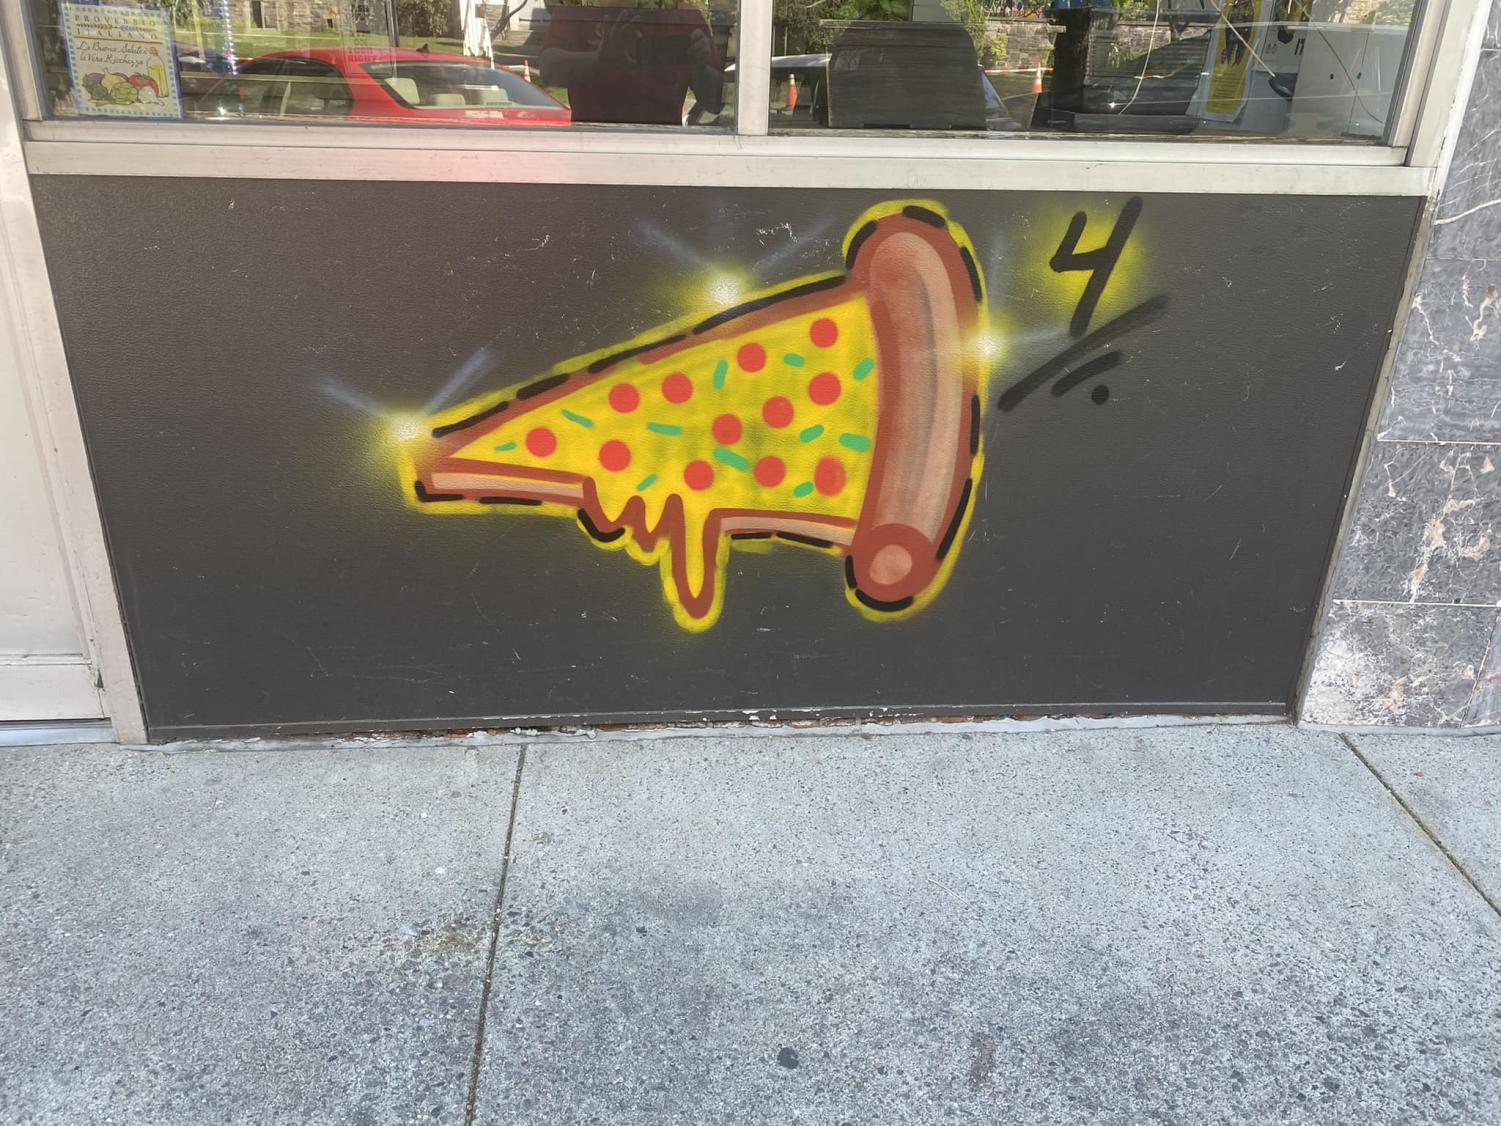 Four Corners takes inspiration from pizza graffiti left on 